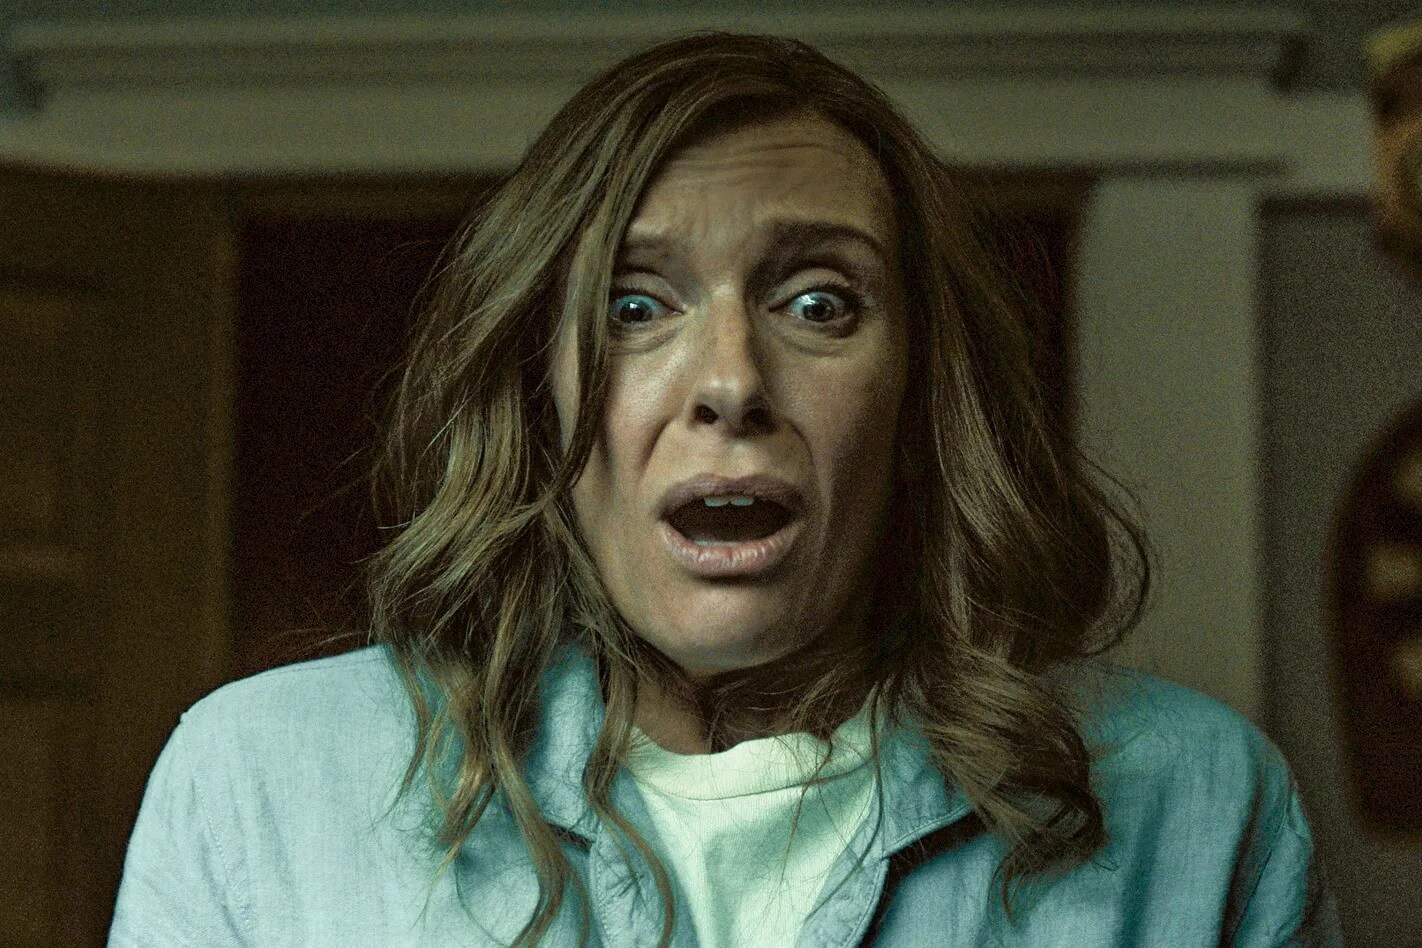 Toni Collette as the mother in Hereditary